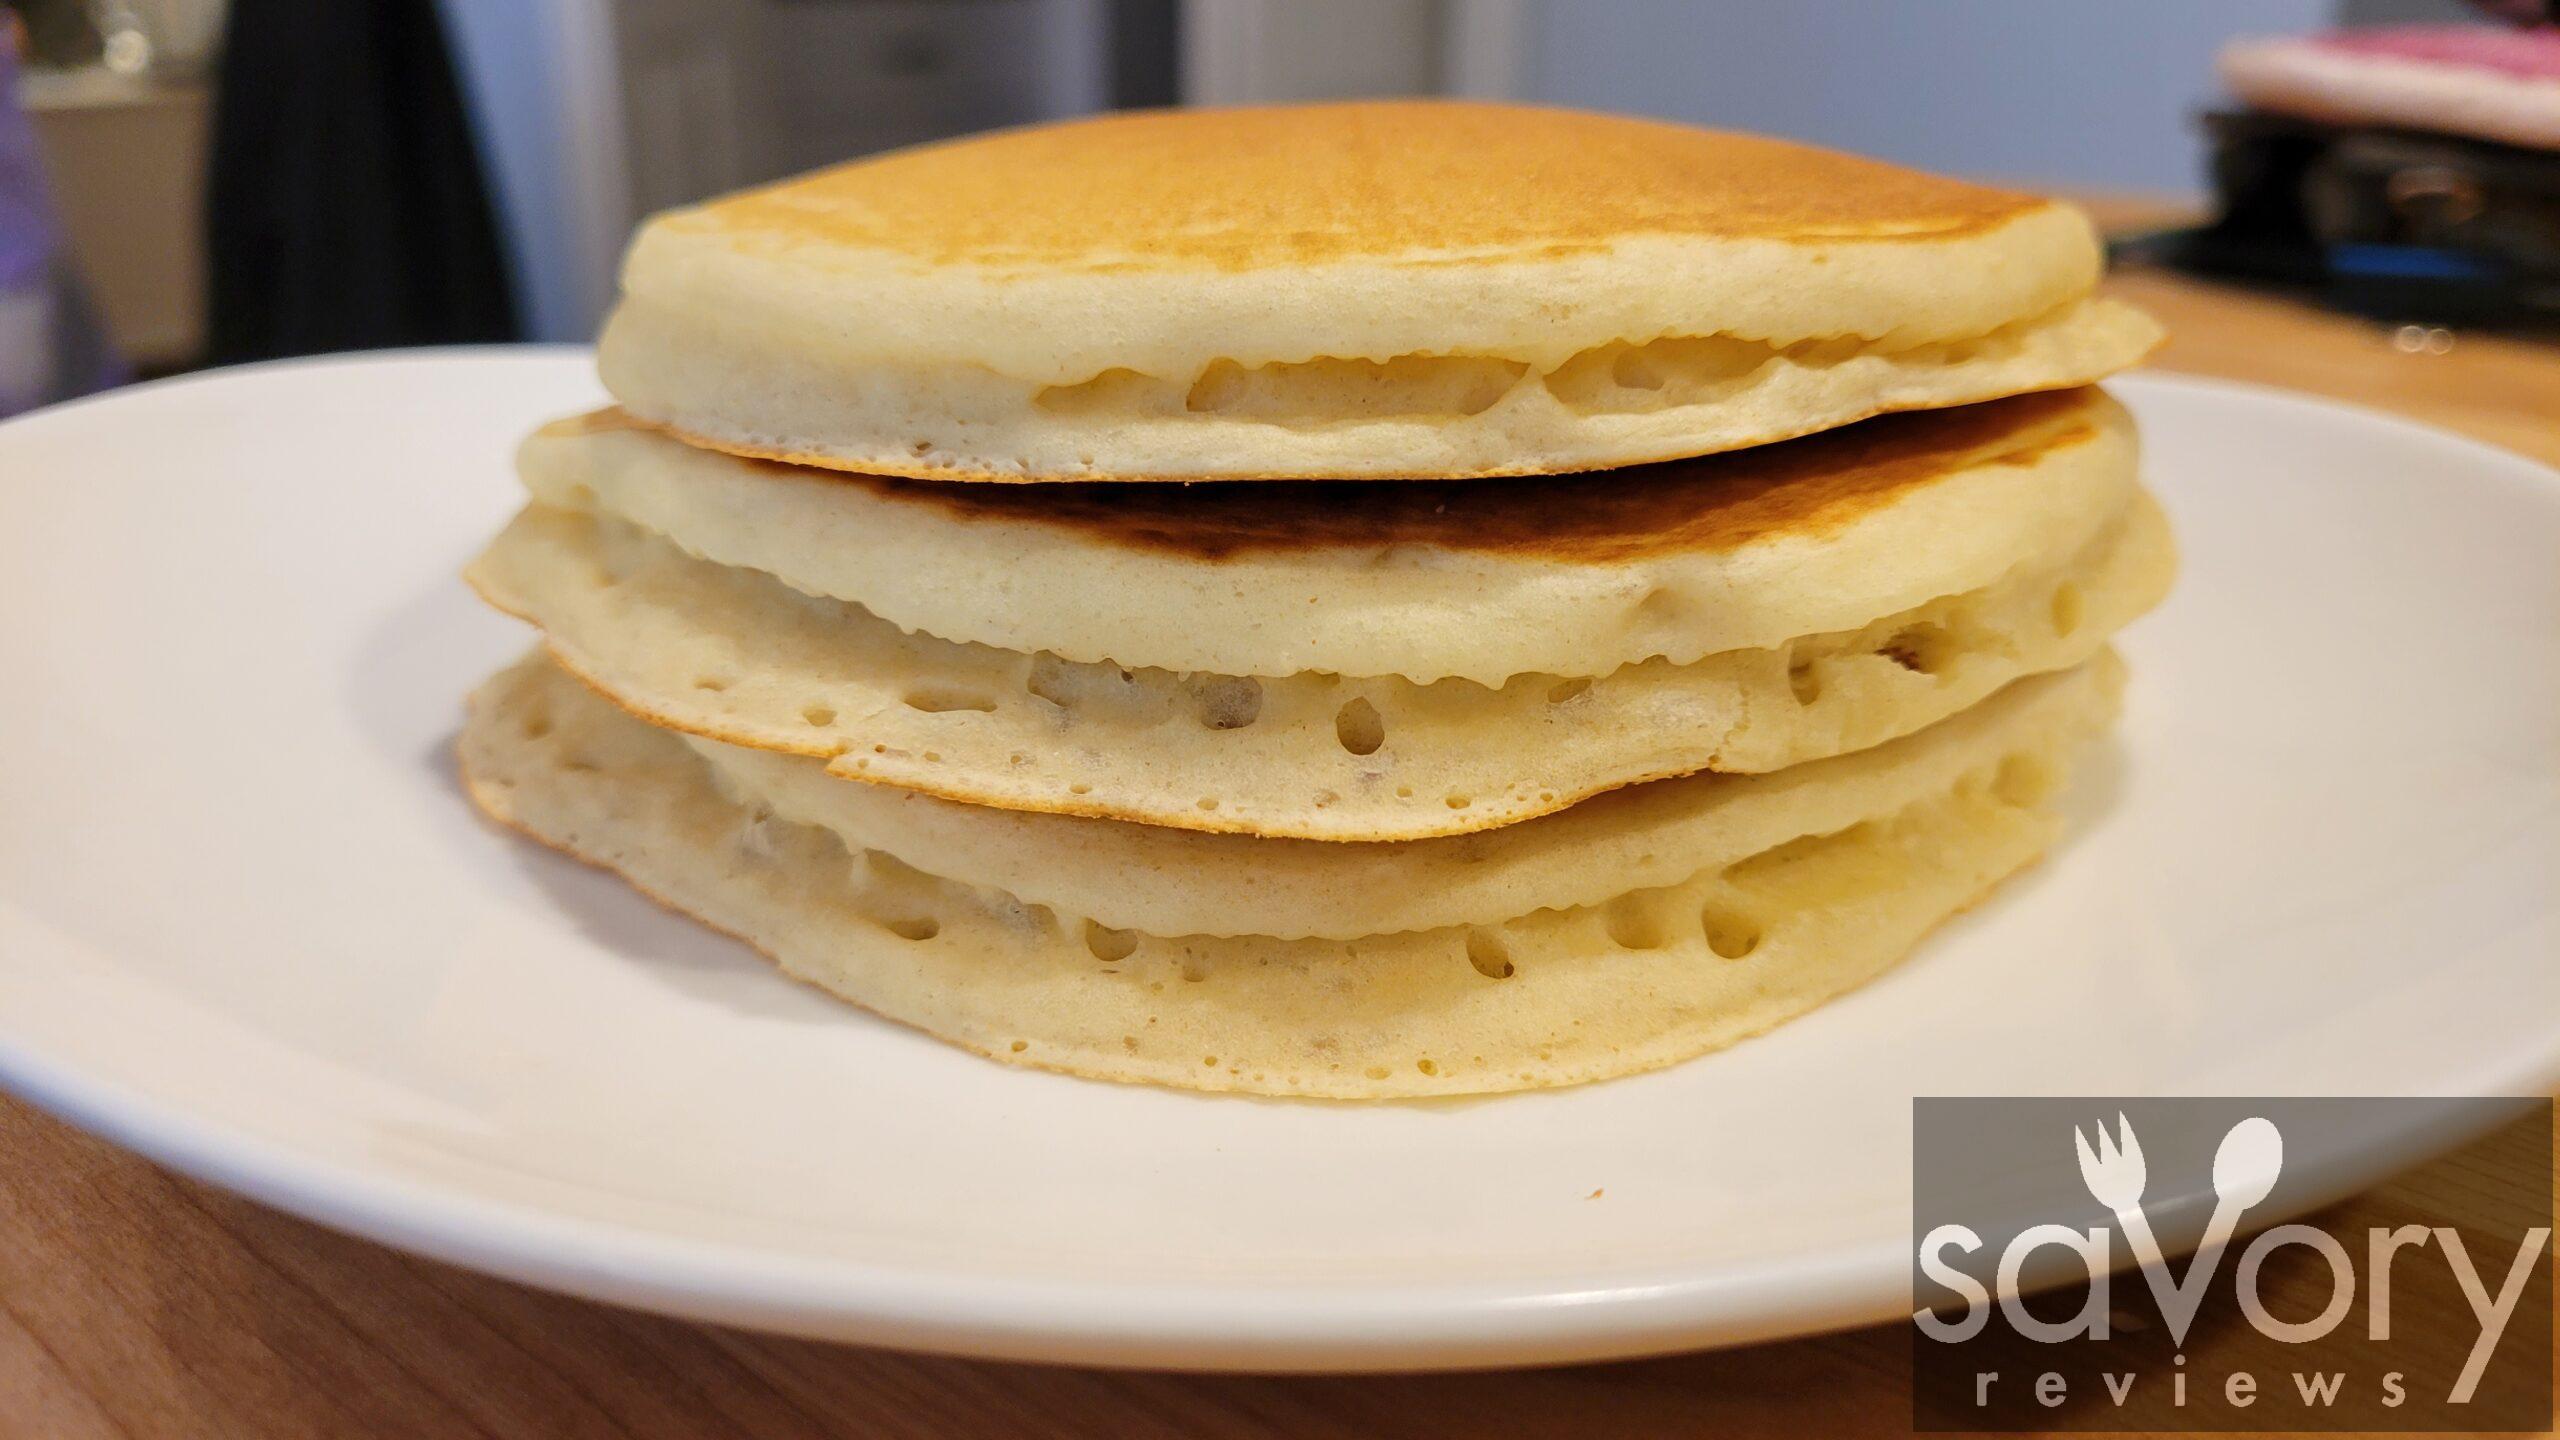 How Do You Make Fluffy Pancakes on an Electric Griddle? - ATGRILLS